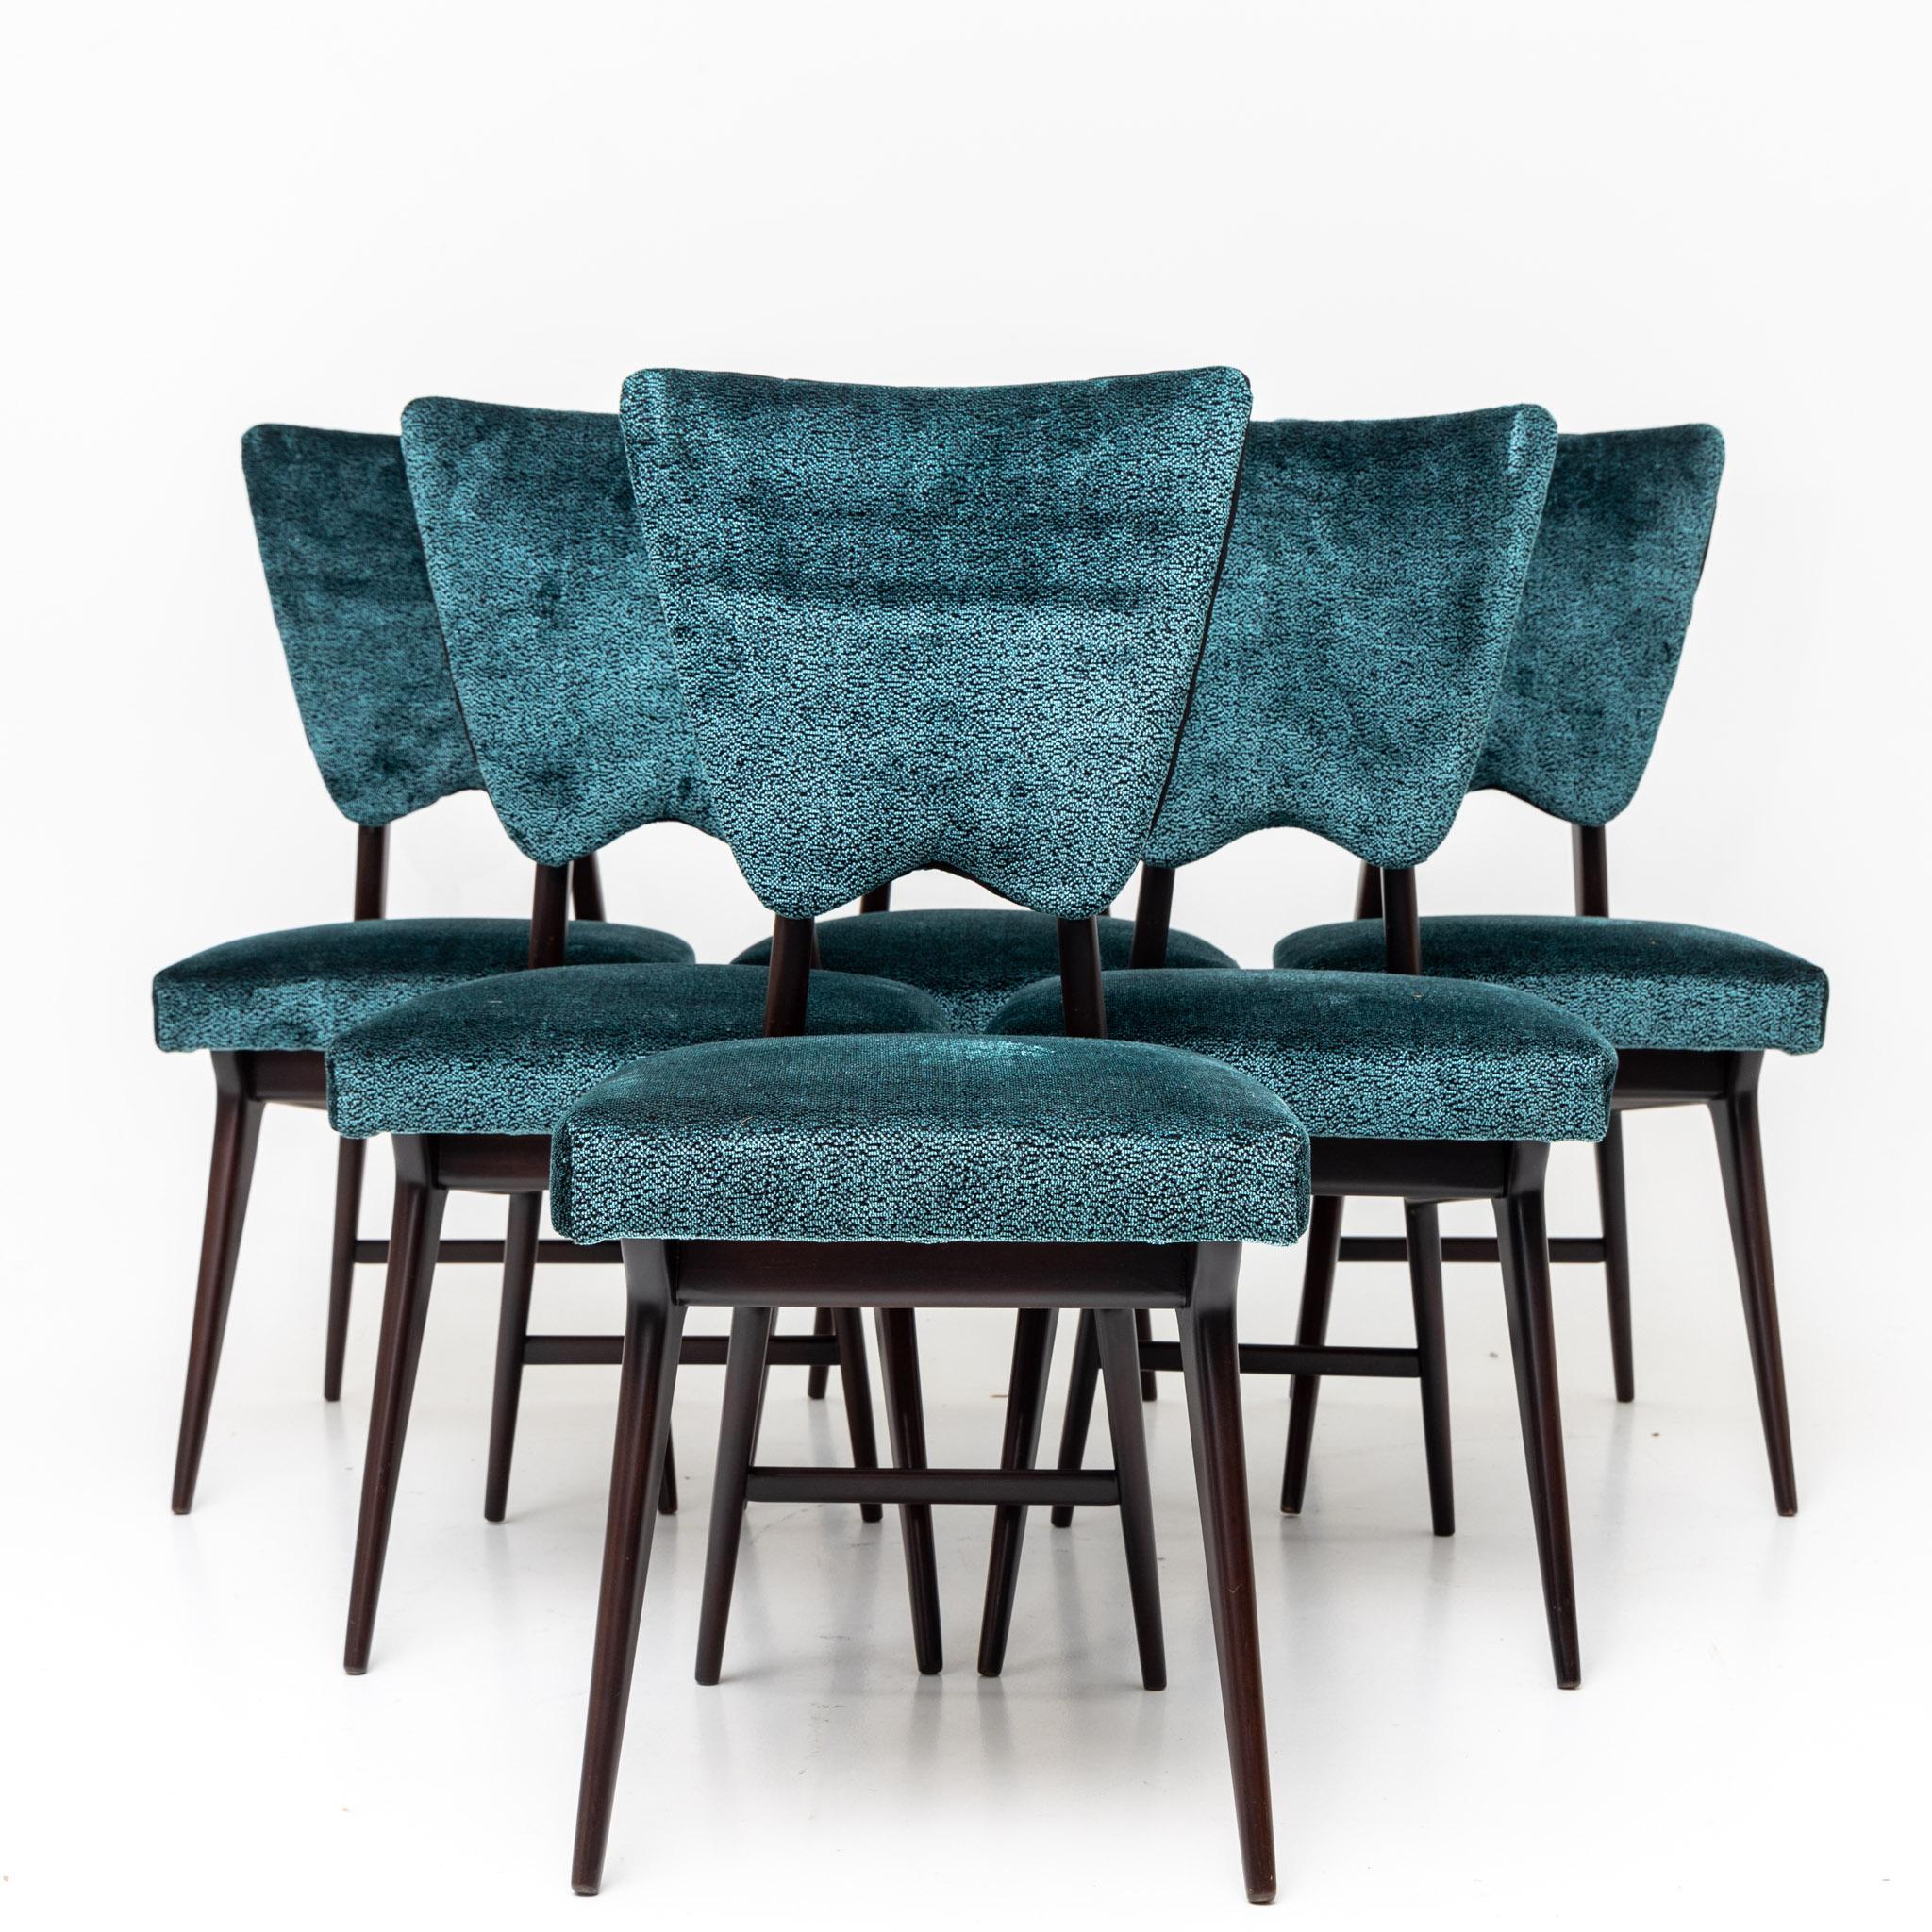 Set of six dining chairs on slender dark stained legs and trapezoidal backs. The chairs were newly upholstered in a blue and black mottled velvet fabric.